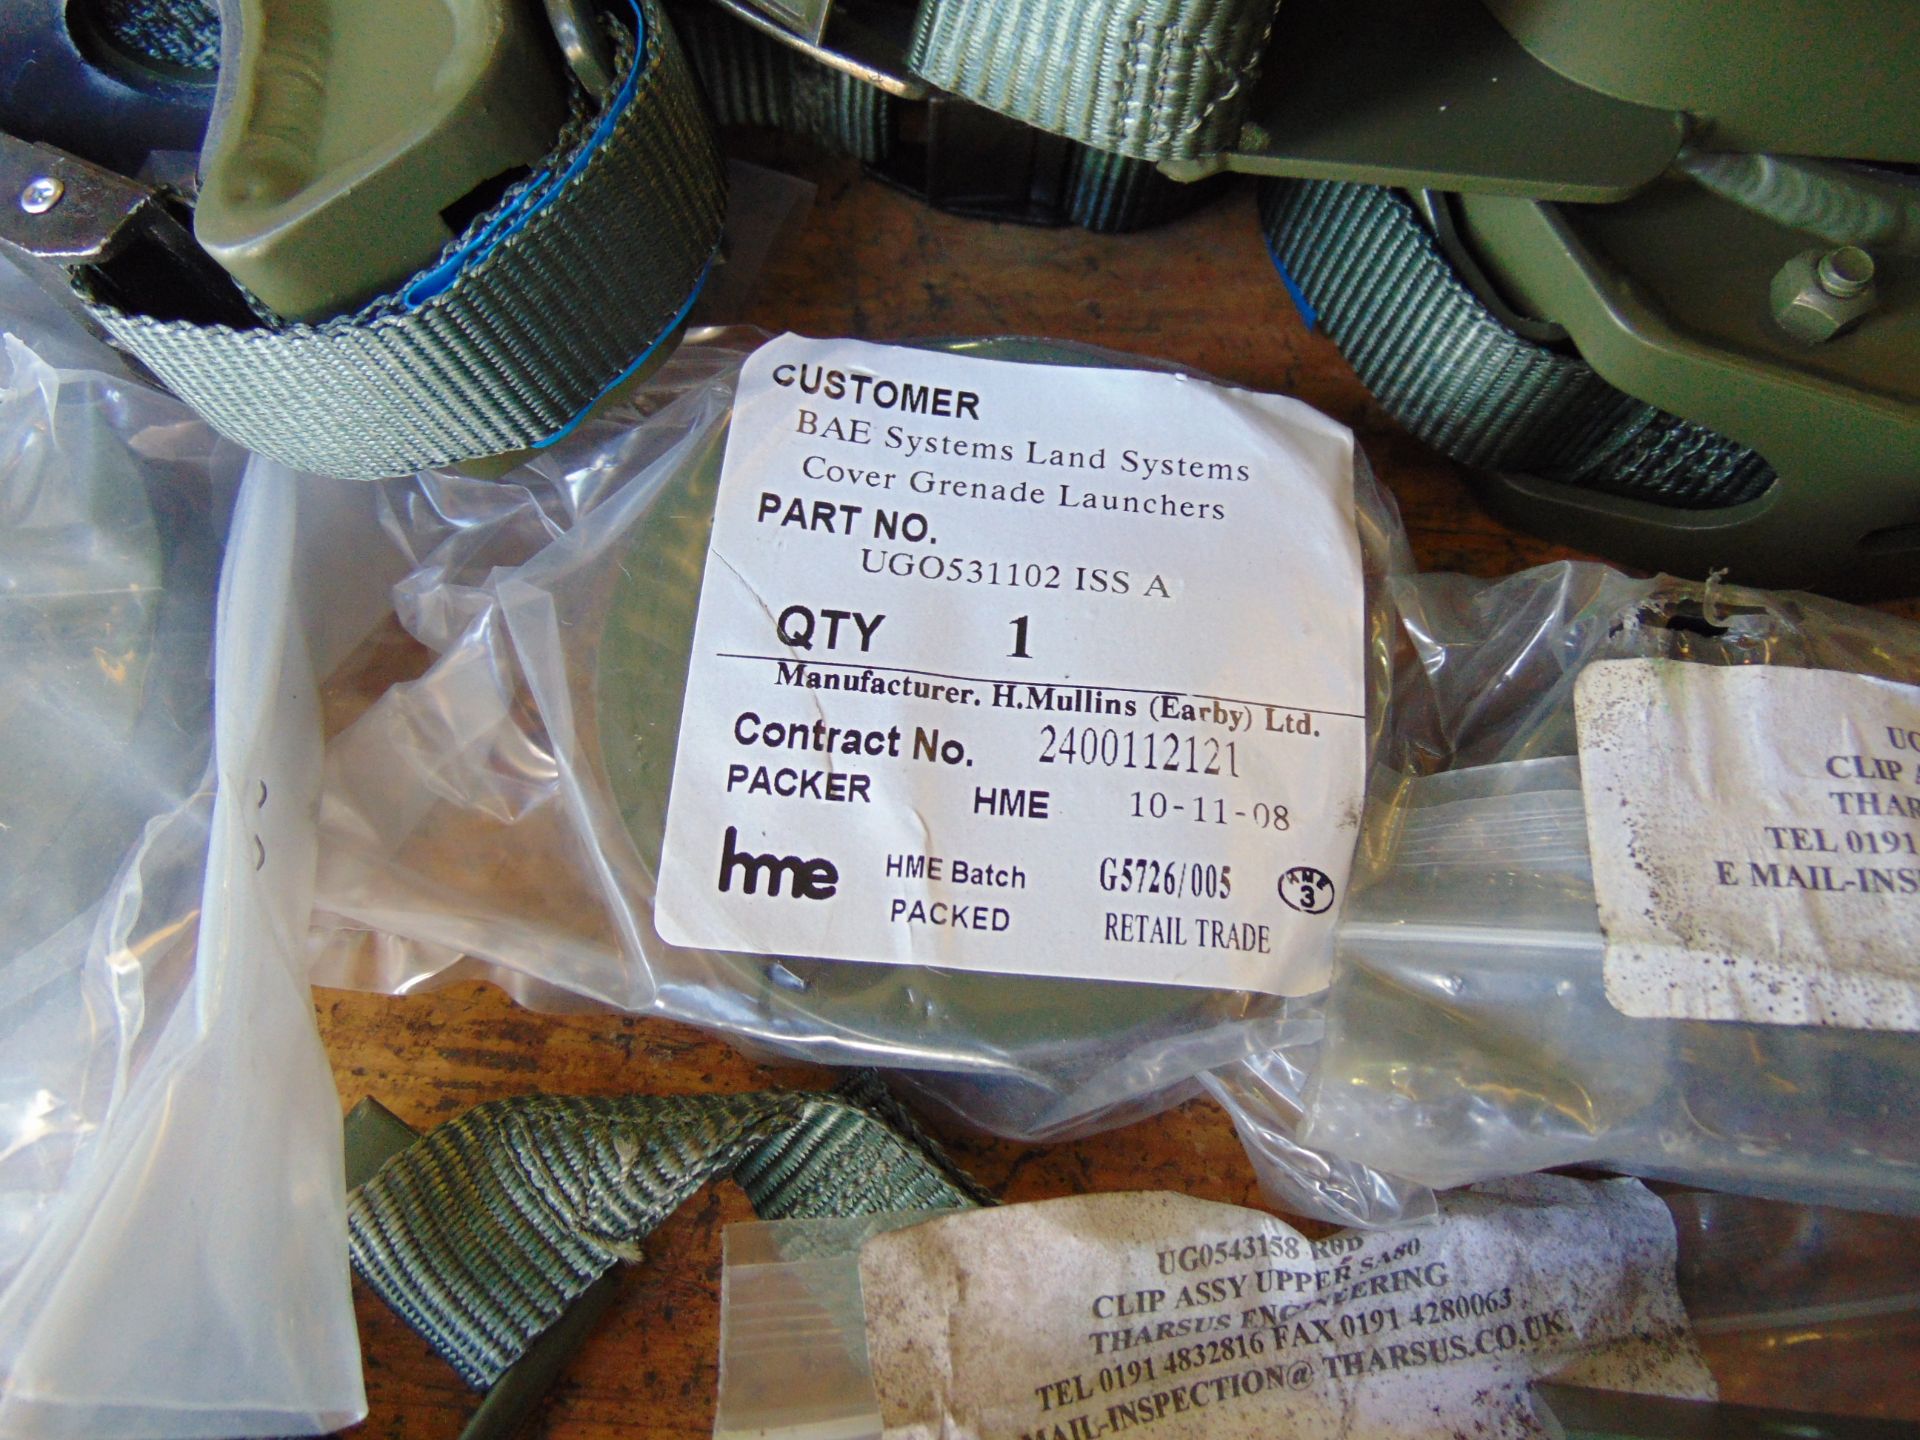 New Unissued WIMIK SA 80 Clips Launcher Covers, Stowage Straps, Barrel Clamps etc - Image 6 of 9